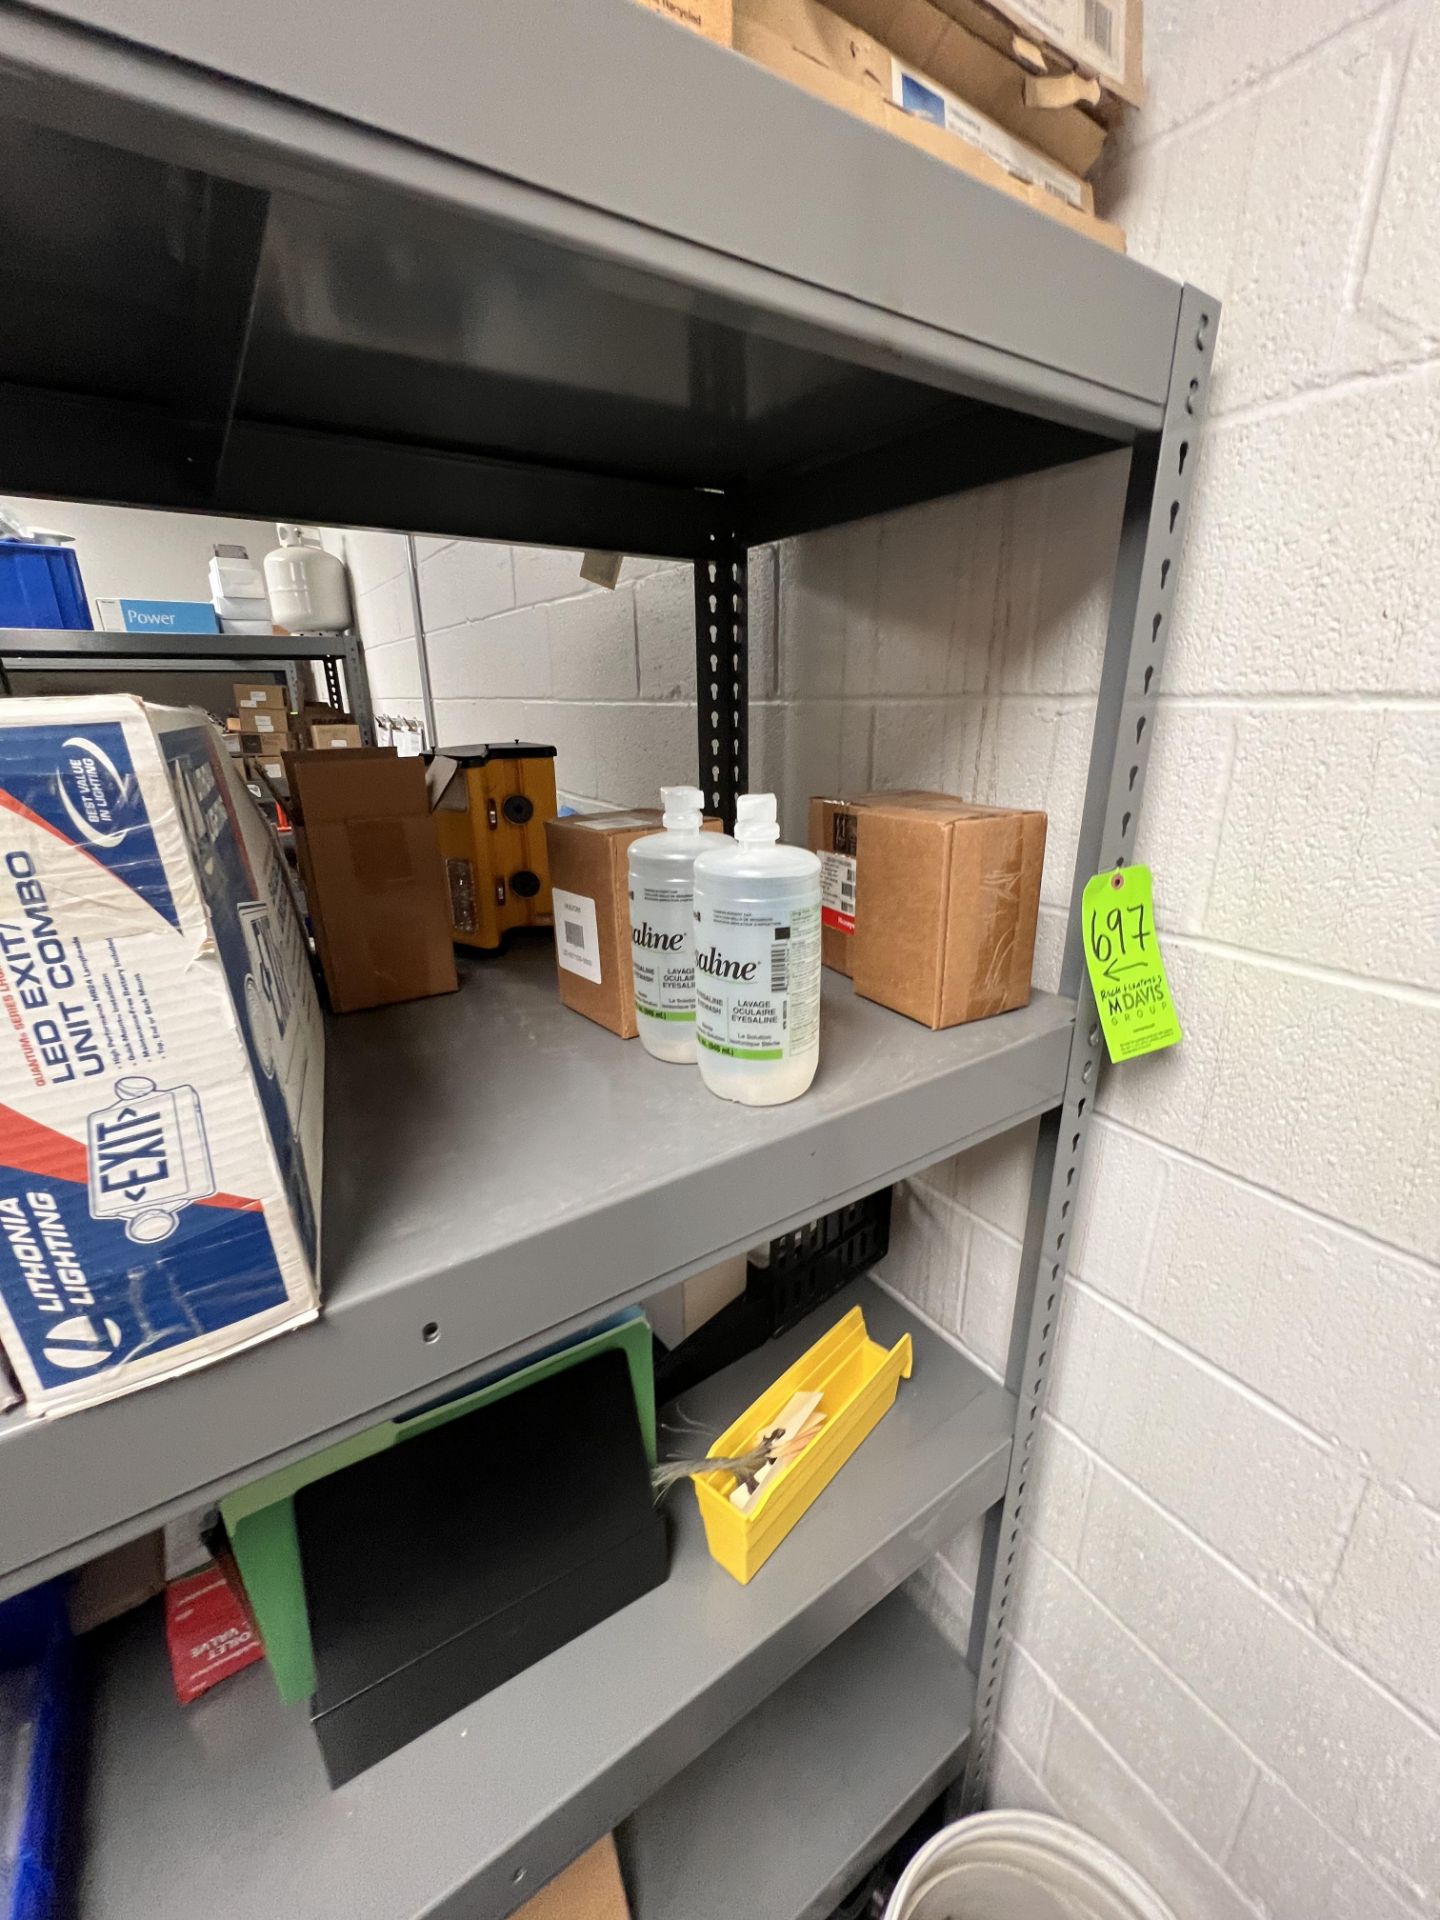 METAL RACK WITH CONTENTS, INCLUDES FACILITIES MANAGEMENT EQUIPMENT EXIT SIGNS, SALINE EYE WASH, - Image 23 of 23